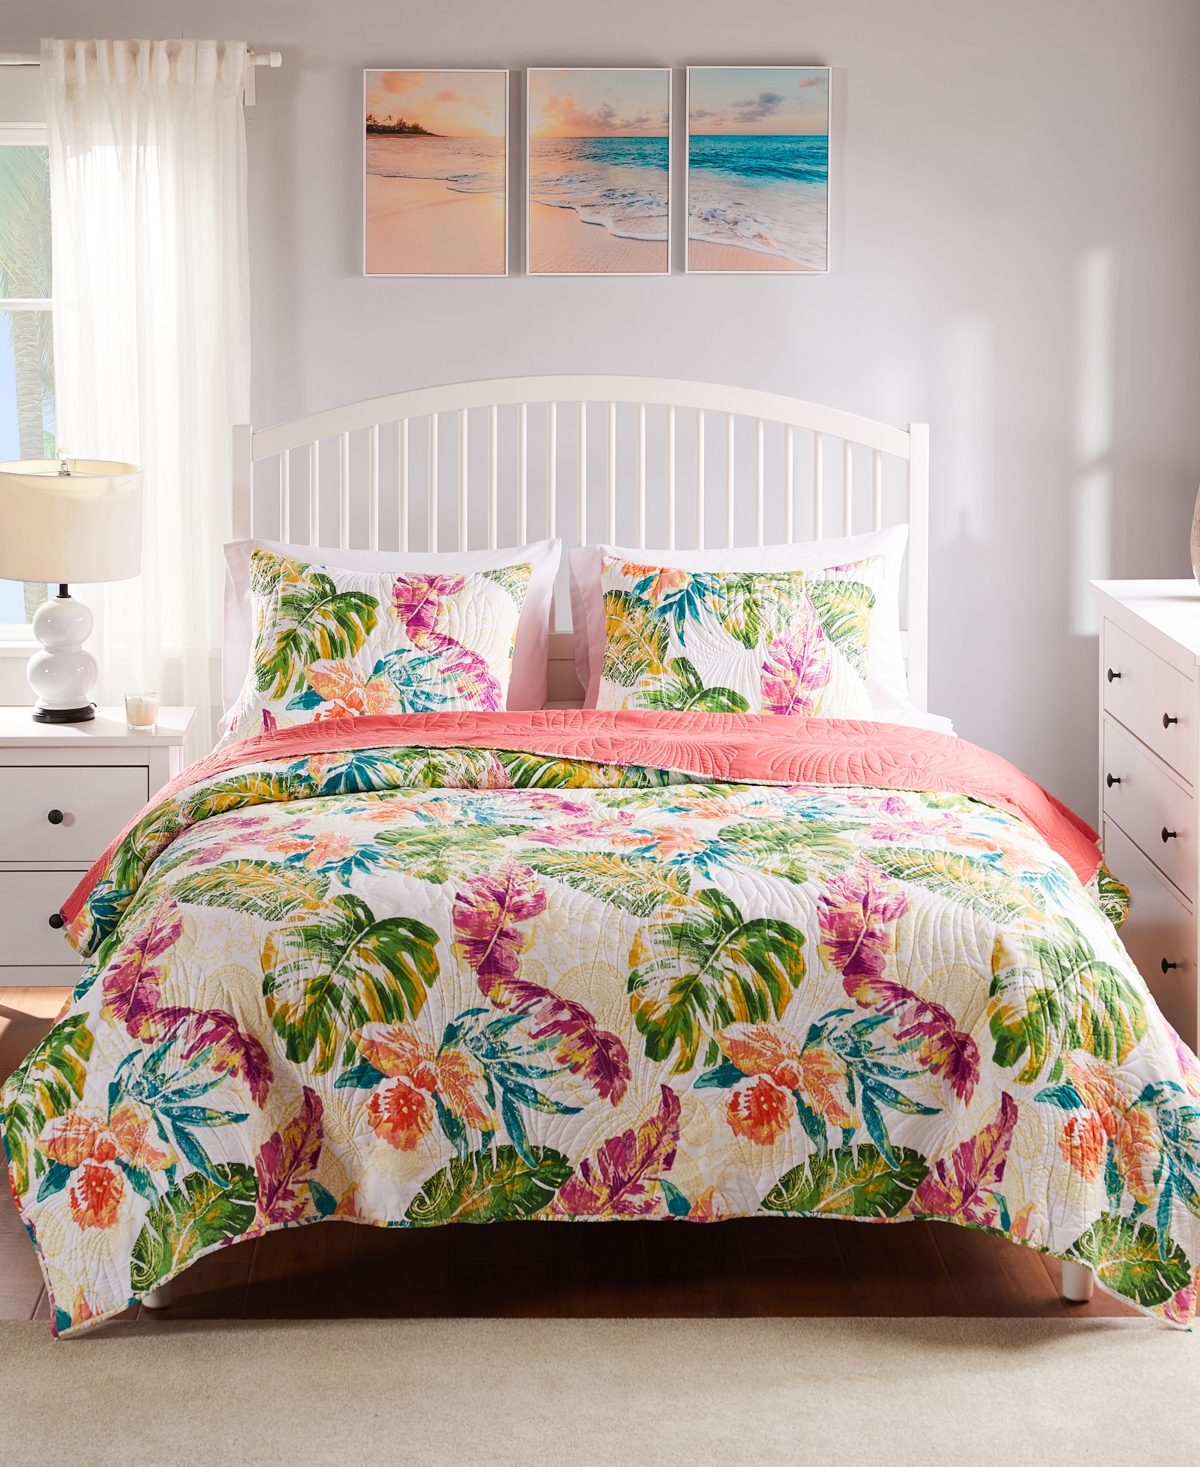 Greenland Home Fashions Tropics Coastal Palm 3 Piece Quilt Set, Full/queen In Coral